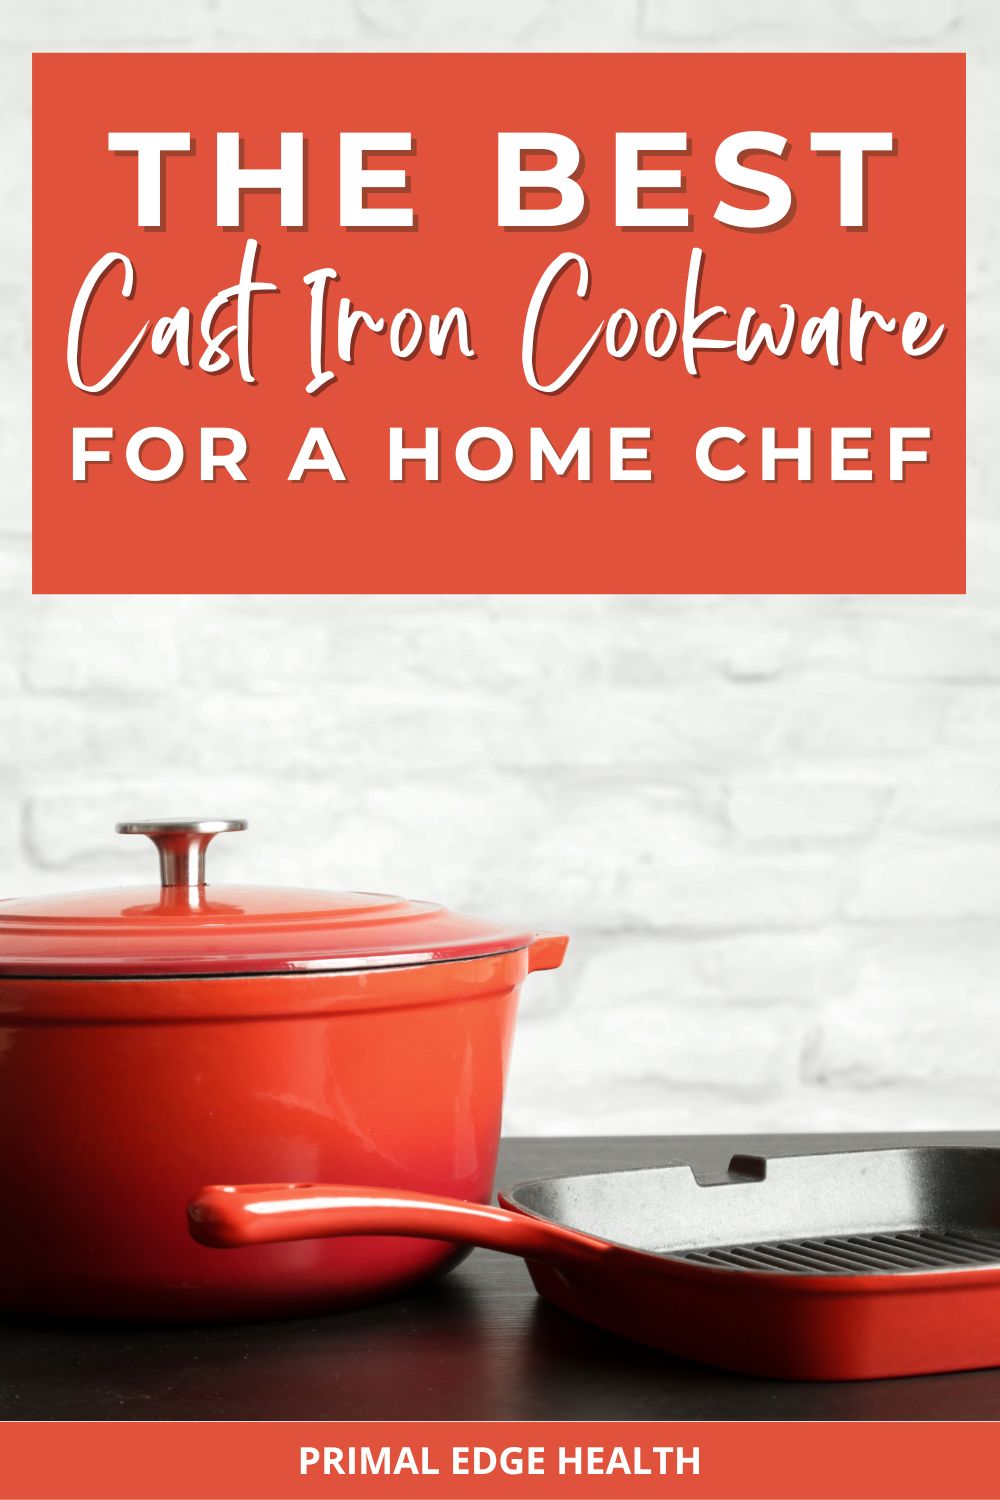 The Best Cast Iron Cookware for a Home Chef by Primal Edge Health.